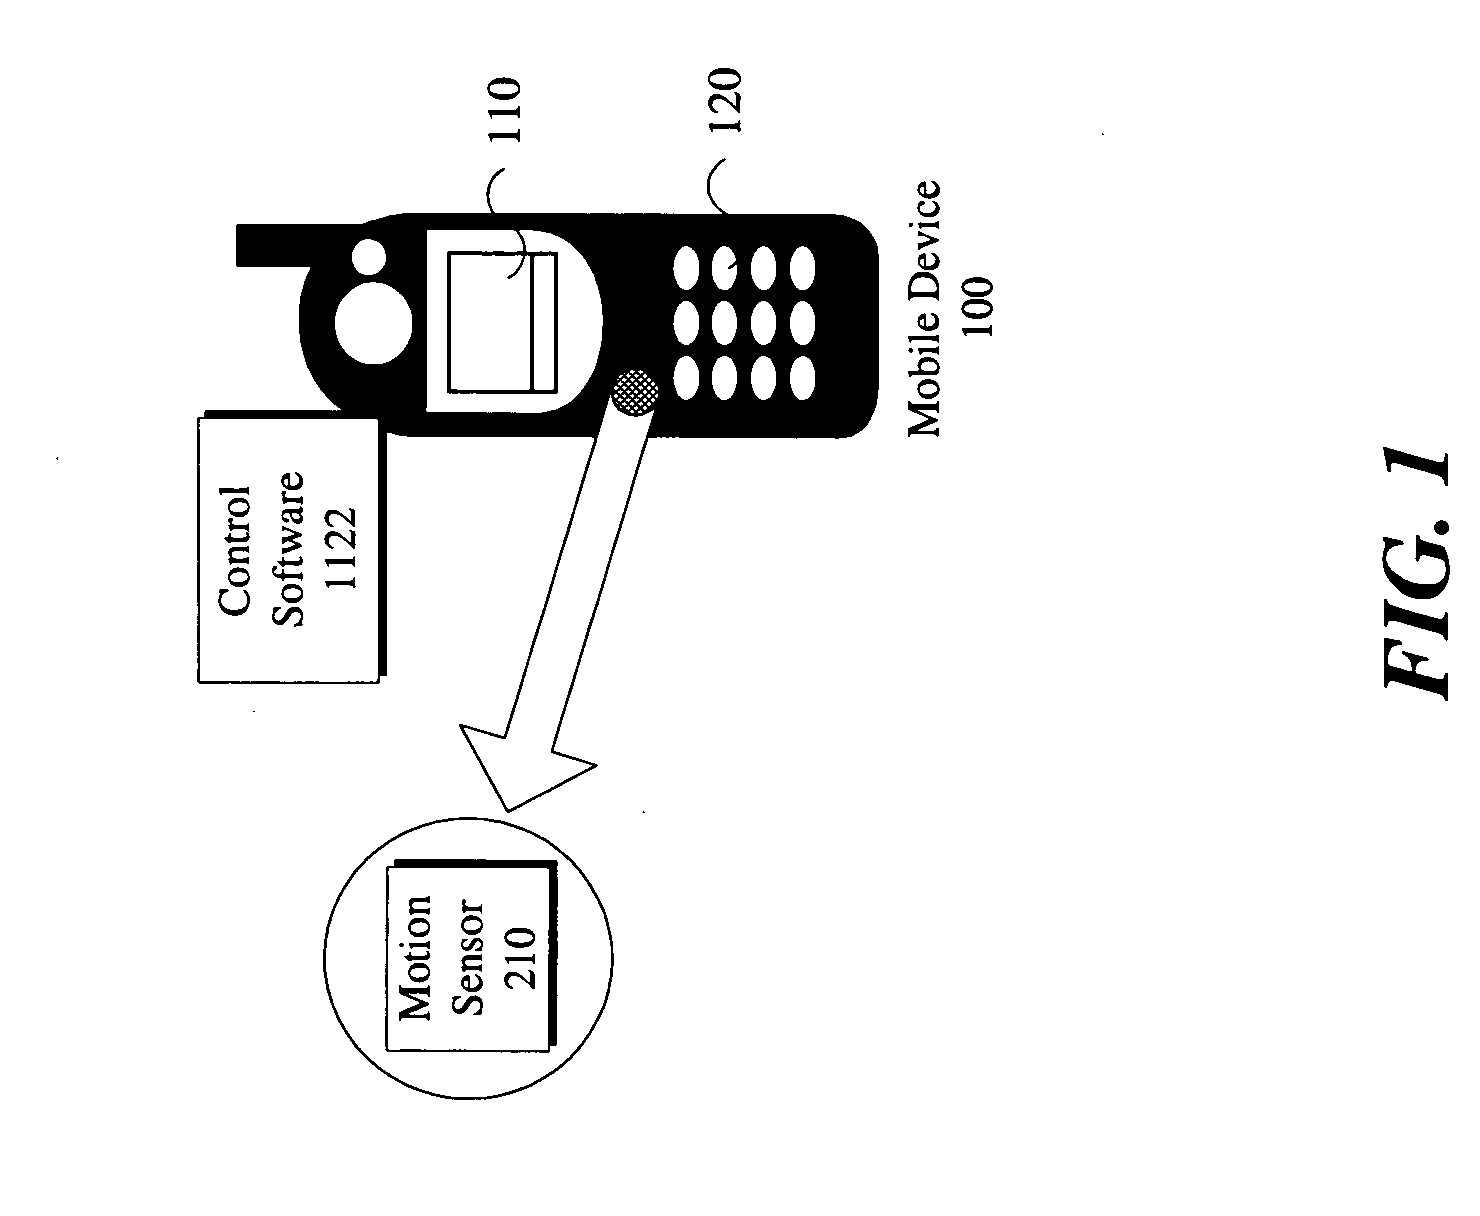 Motion sensitive illumination system and method for a mobile computing device